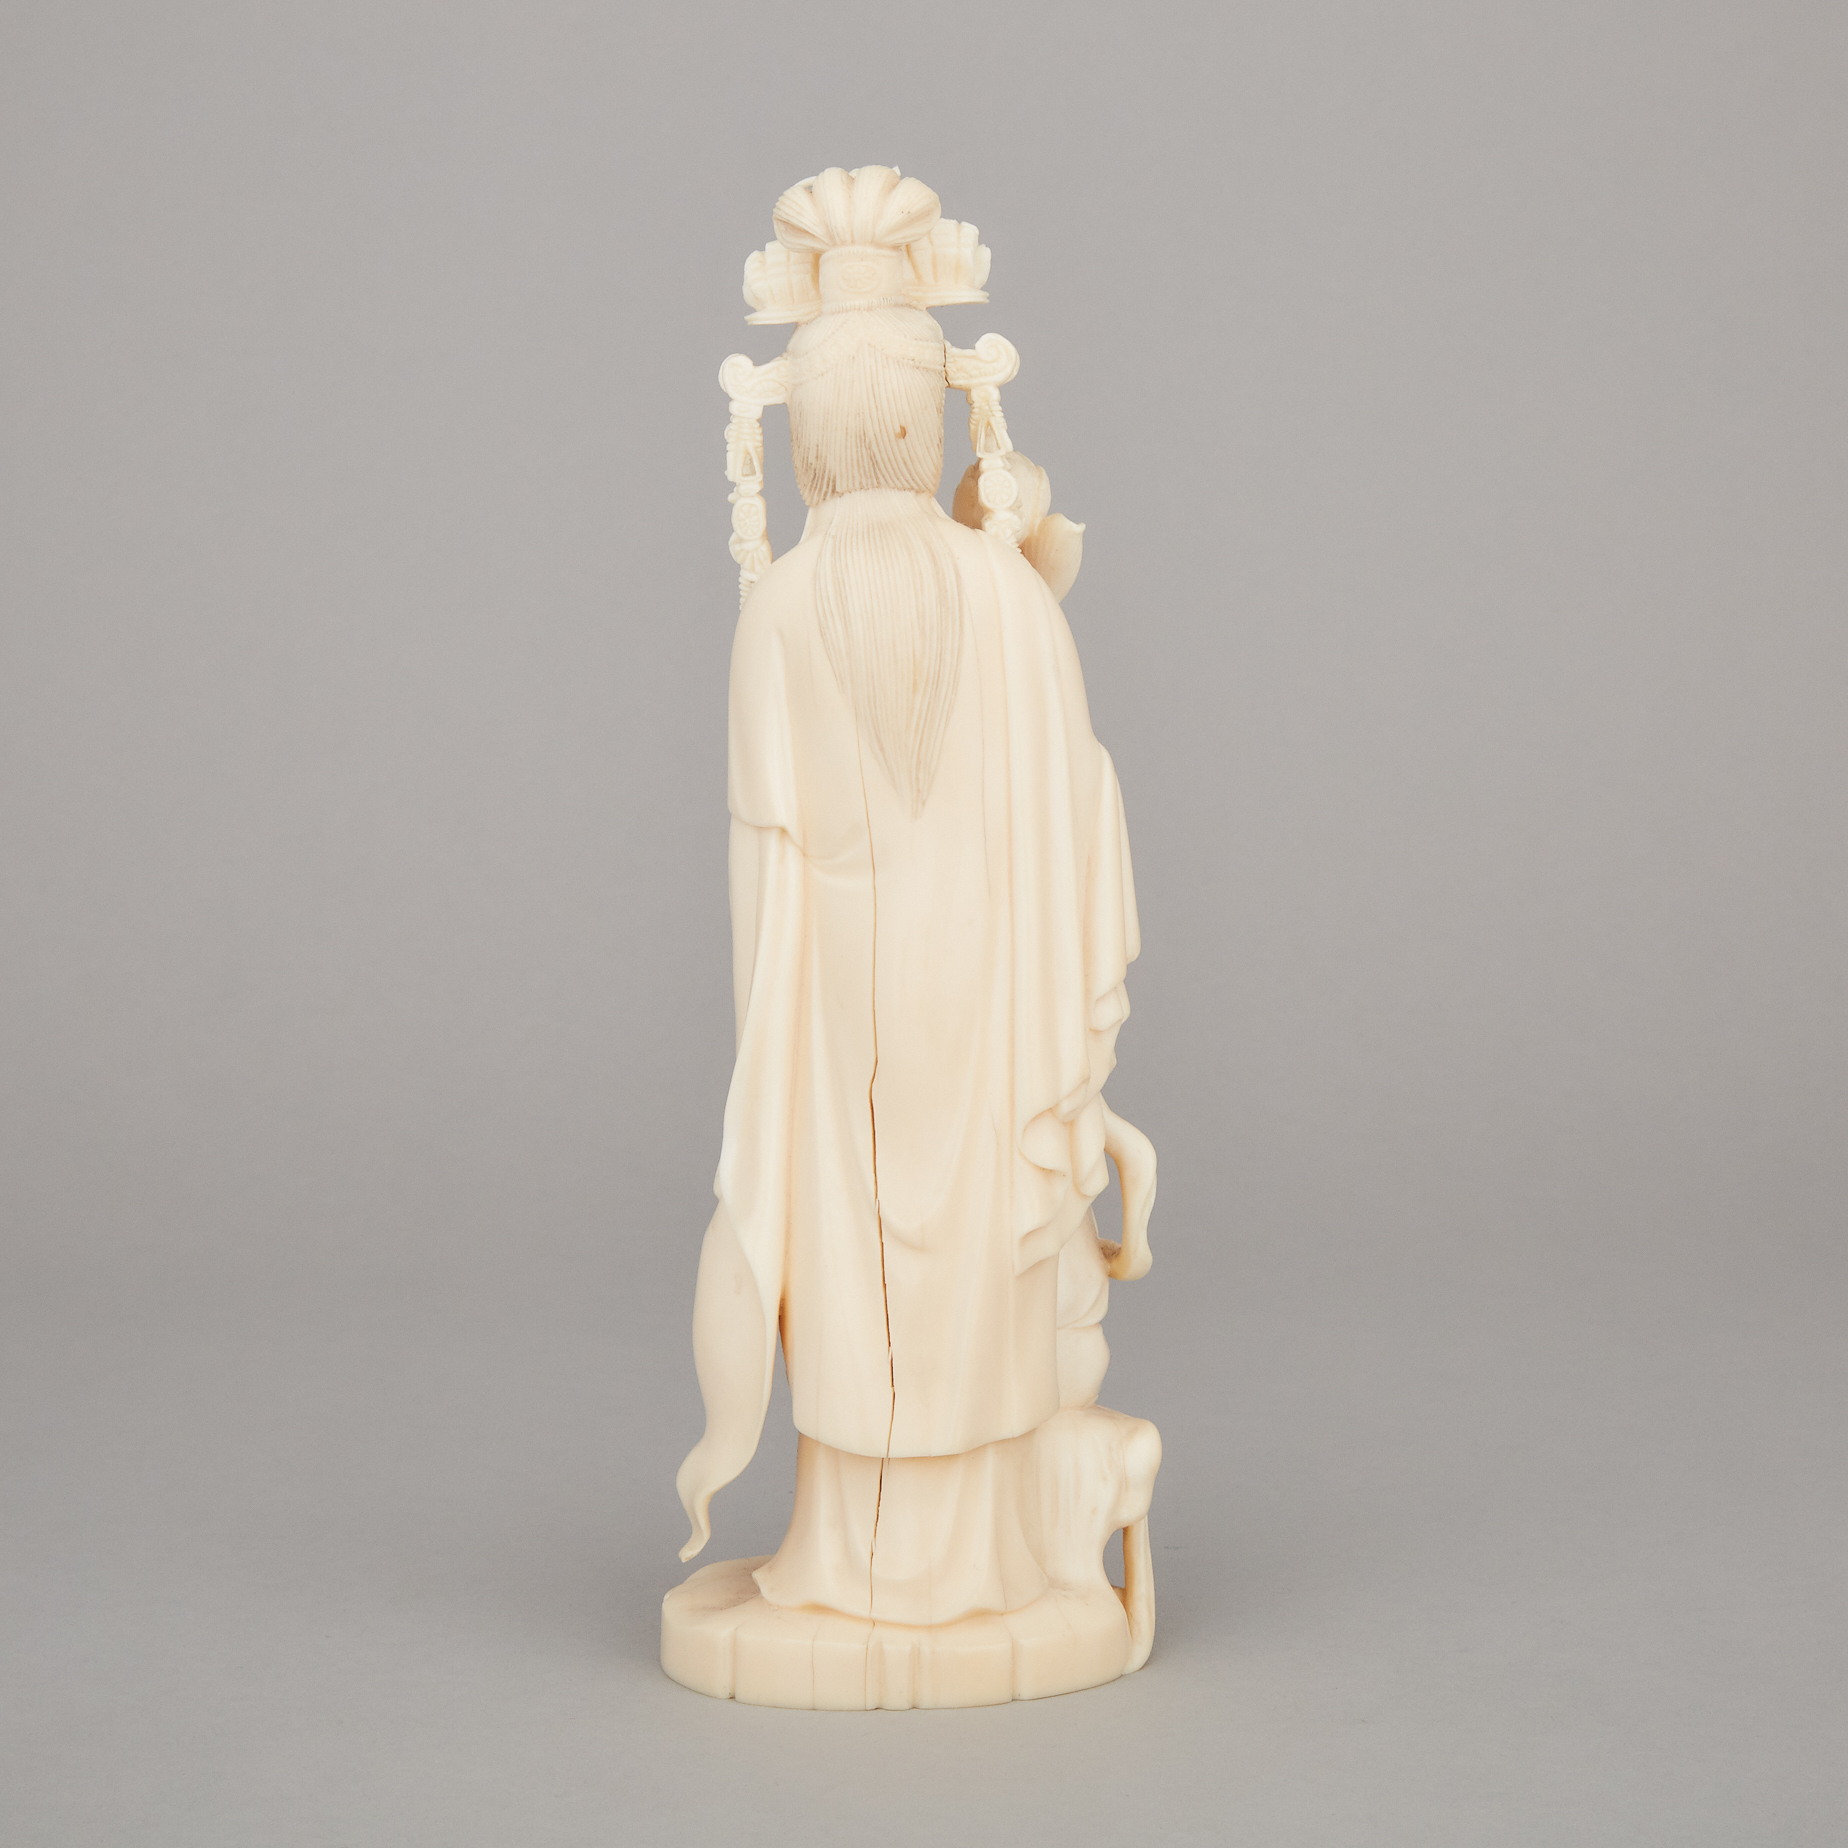 A Japanese Ivory Carved Kannon and Attendant, Mid-20th Century